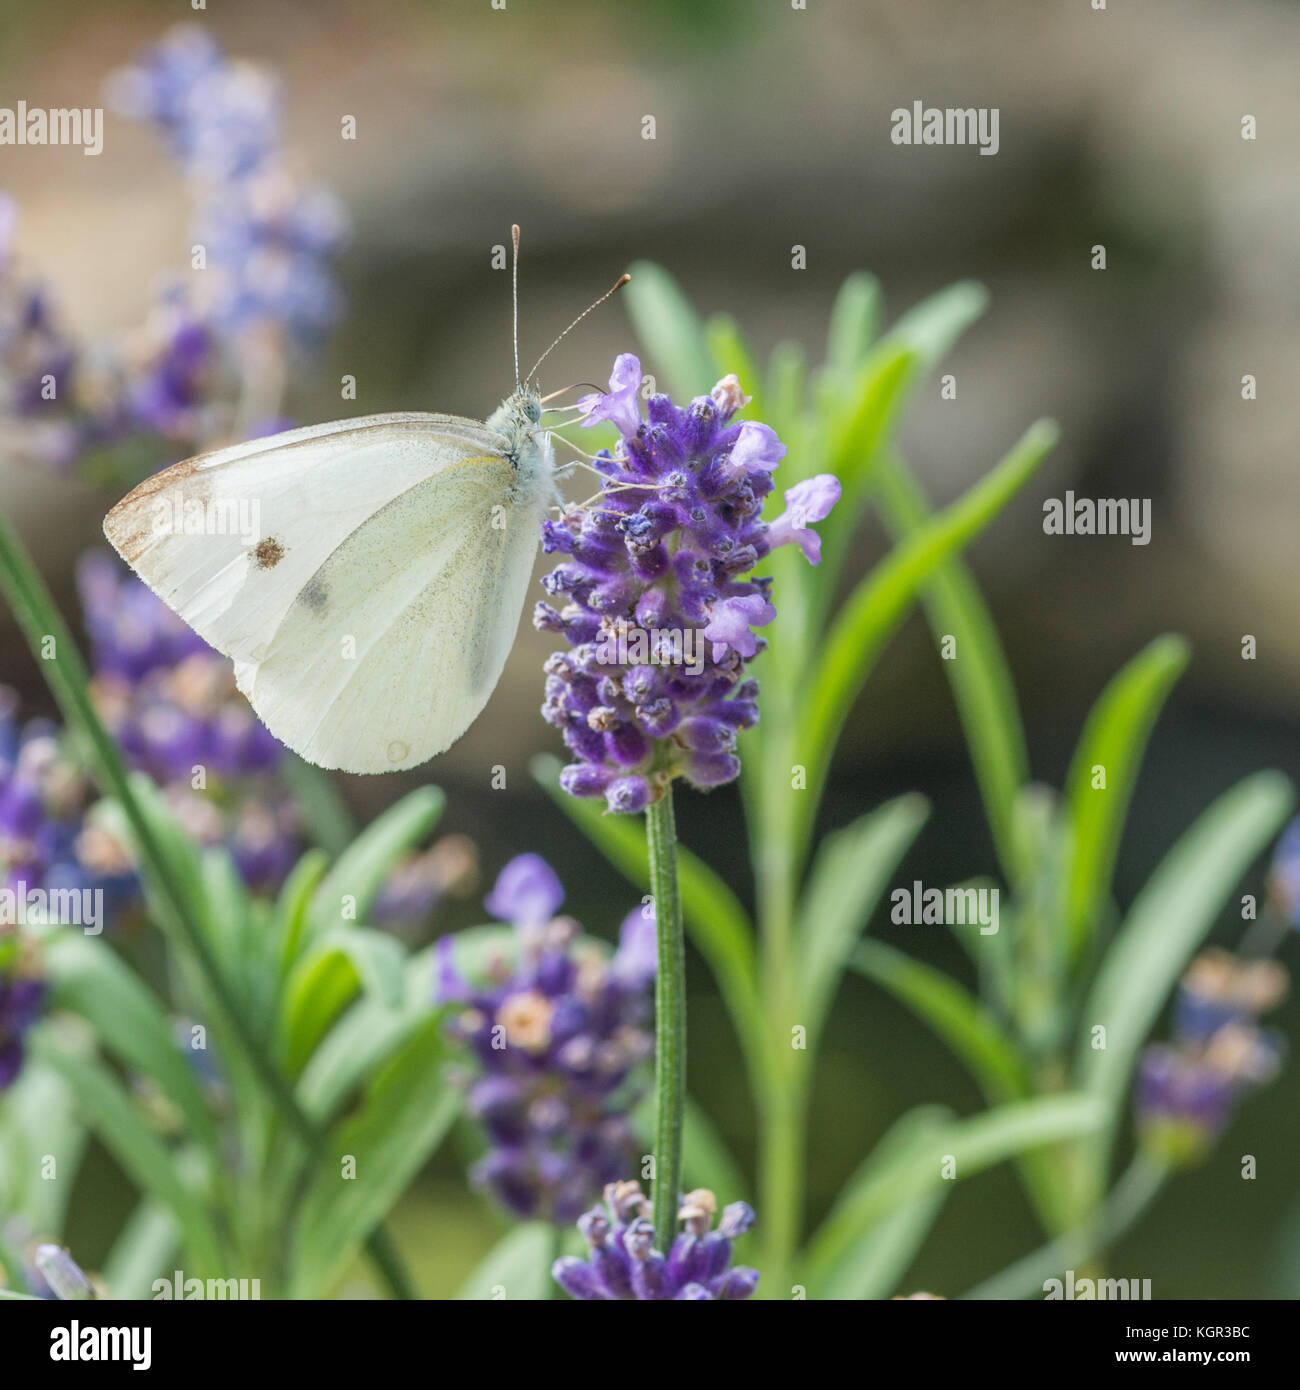 A small cabbage white butterfly collects pollen from a lavender bloom. Stock Photo